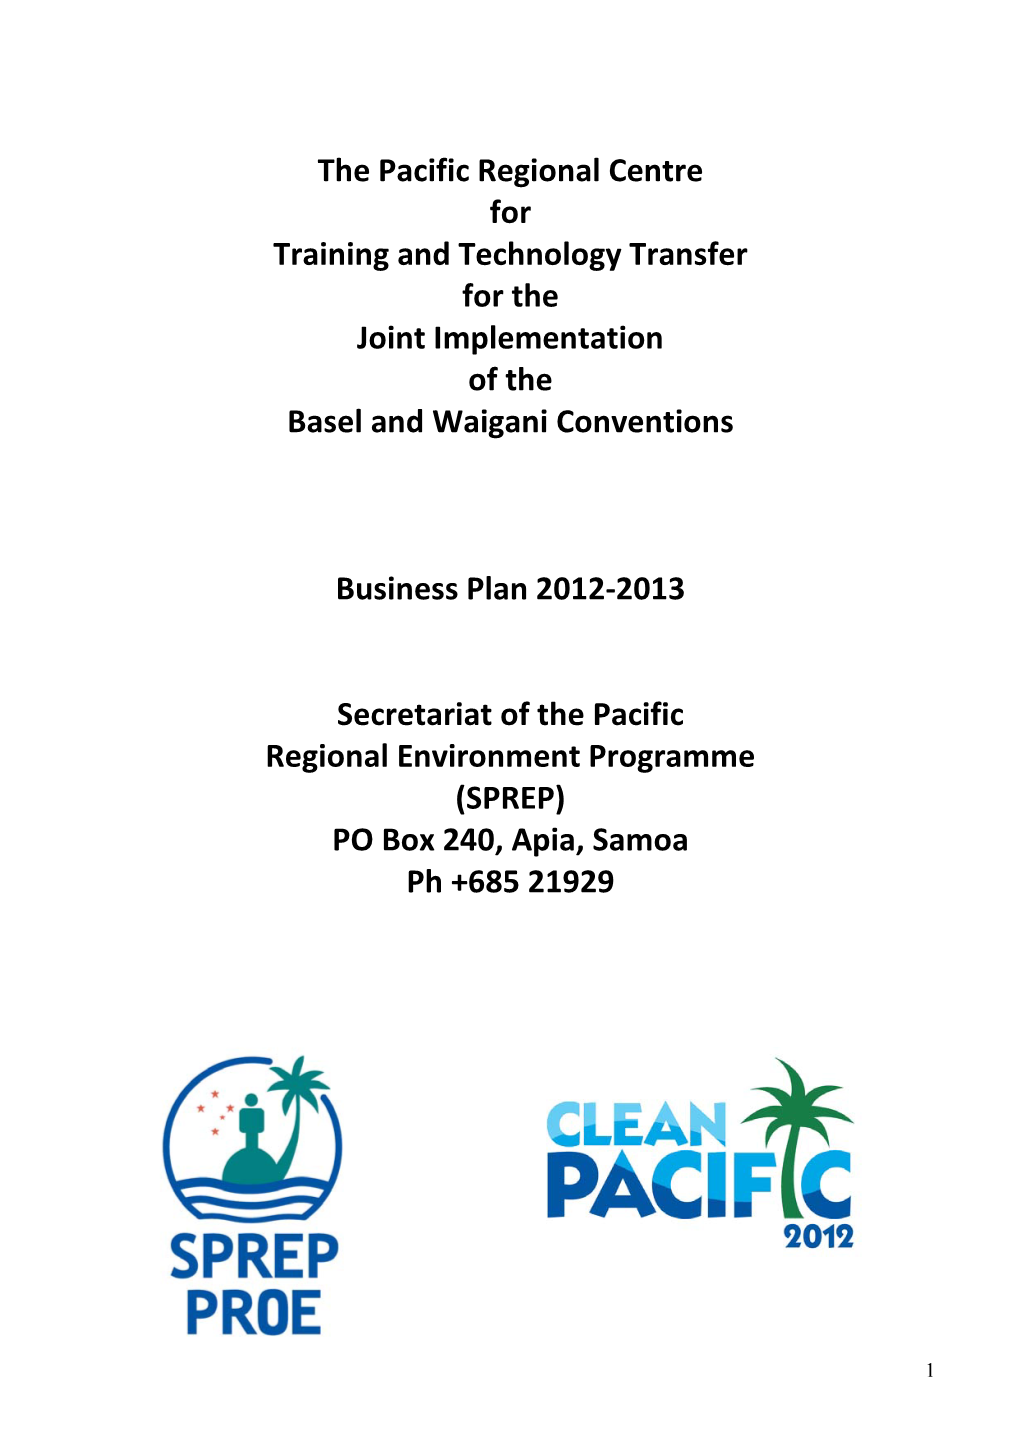 The Pacific Regional Centre for Training and Technology Transfer for the Joint Implementation of the Basel and Waigani Conventions